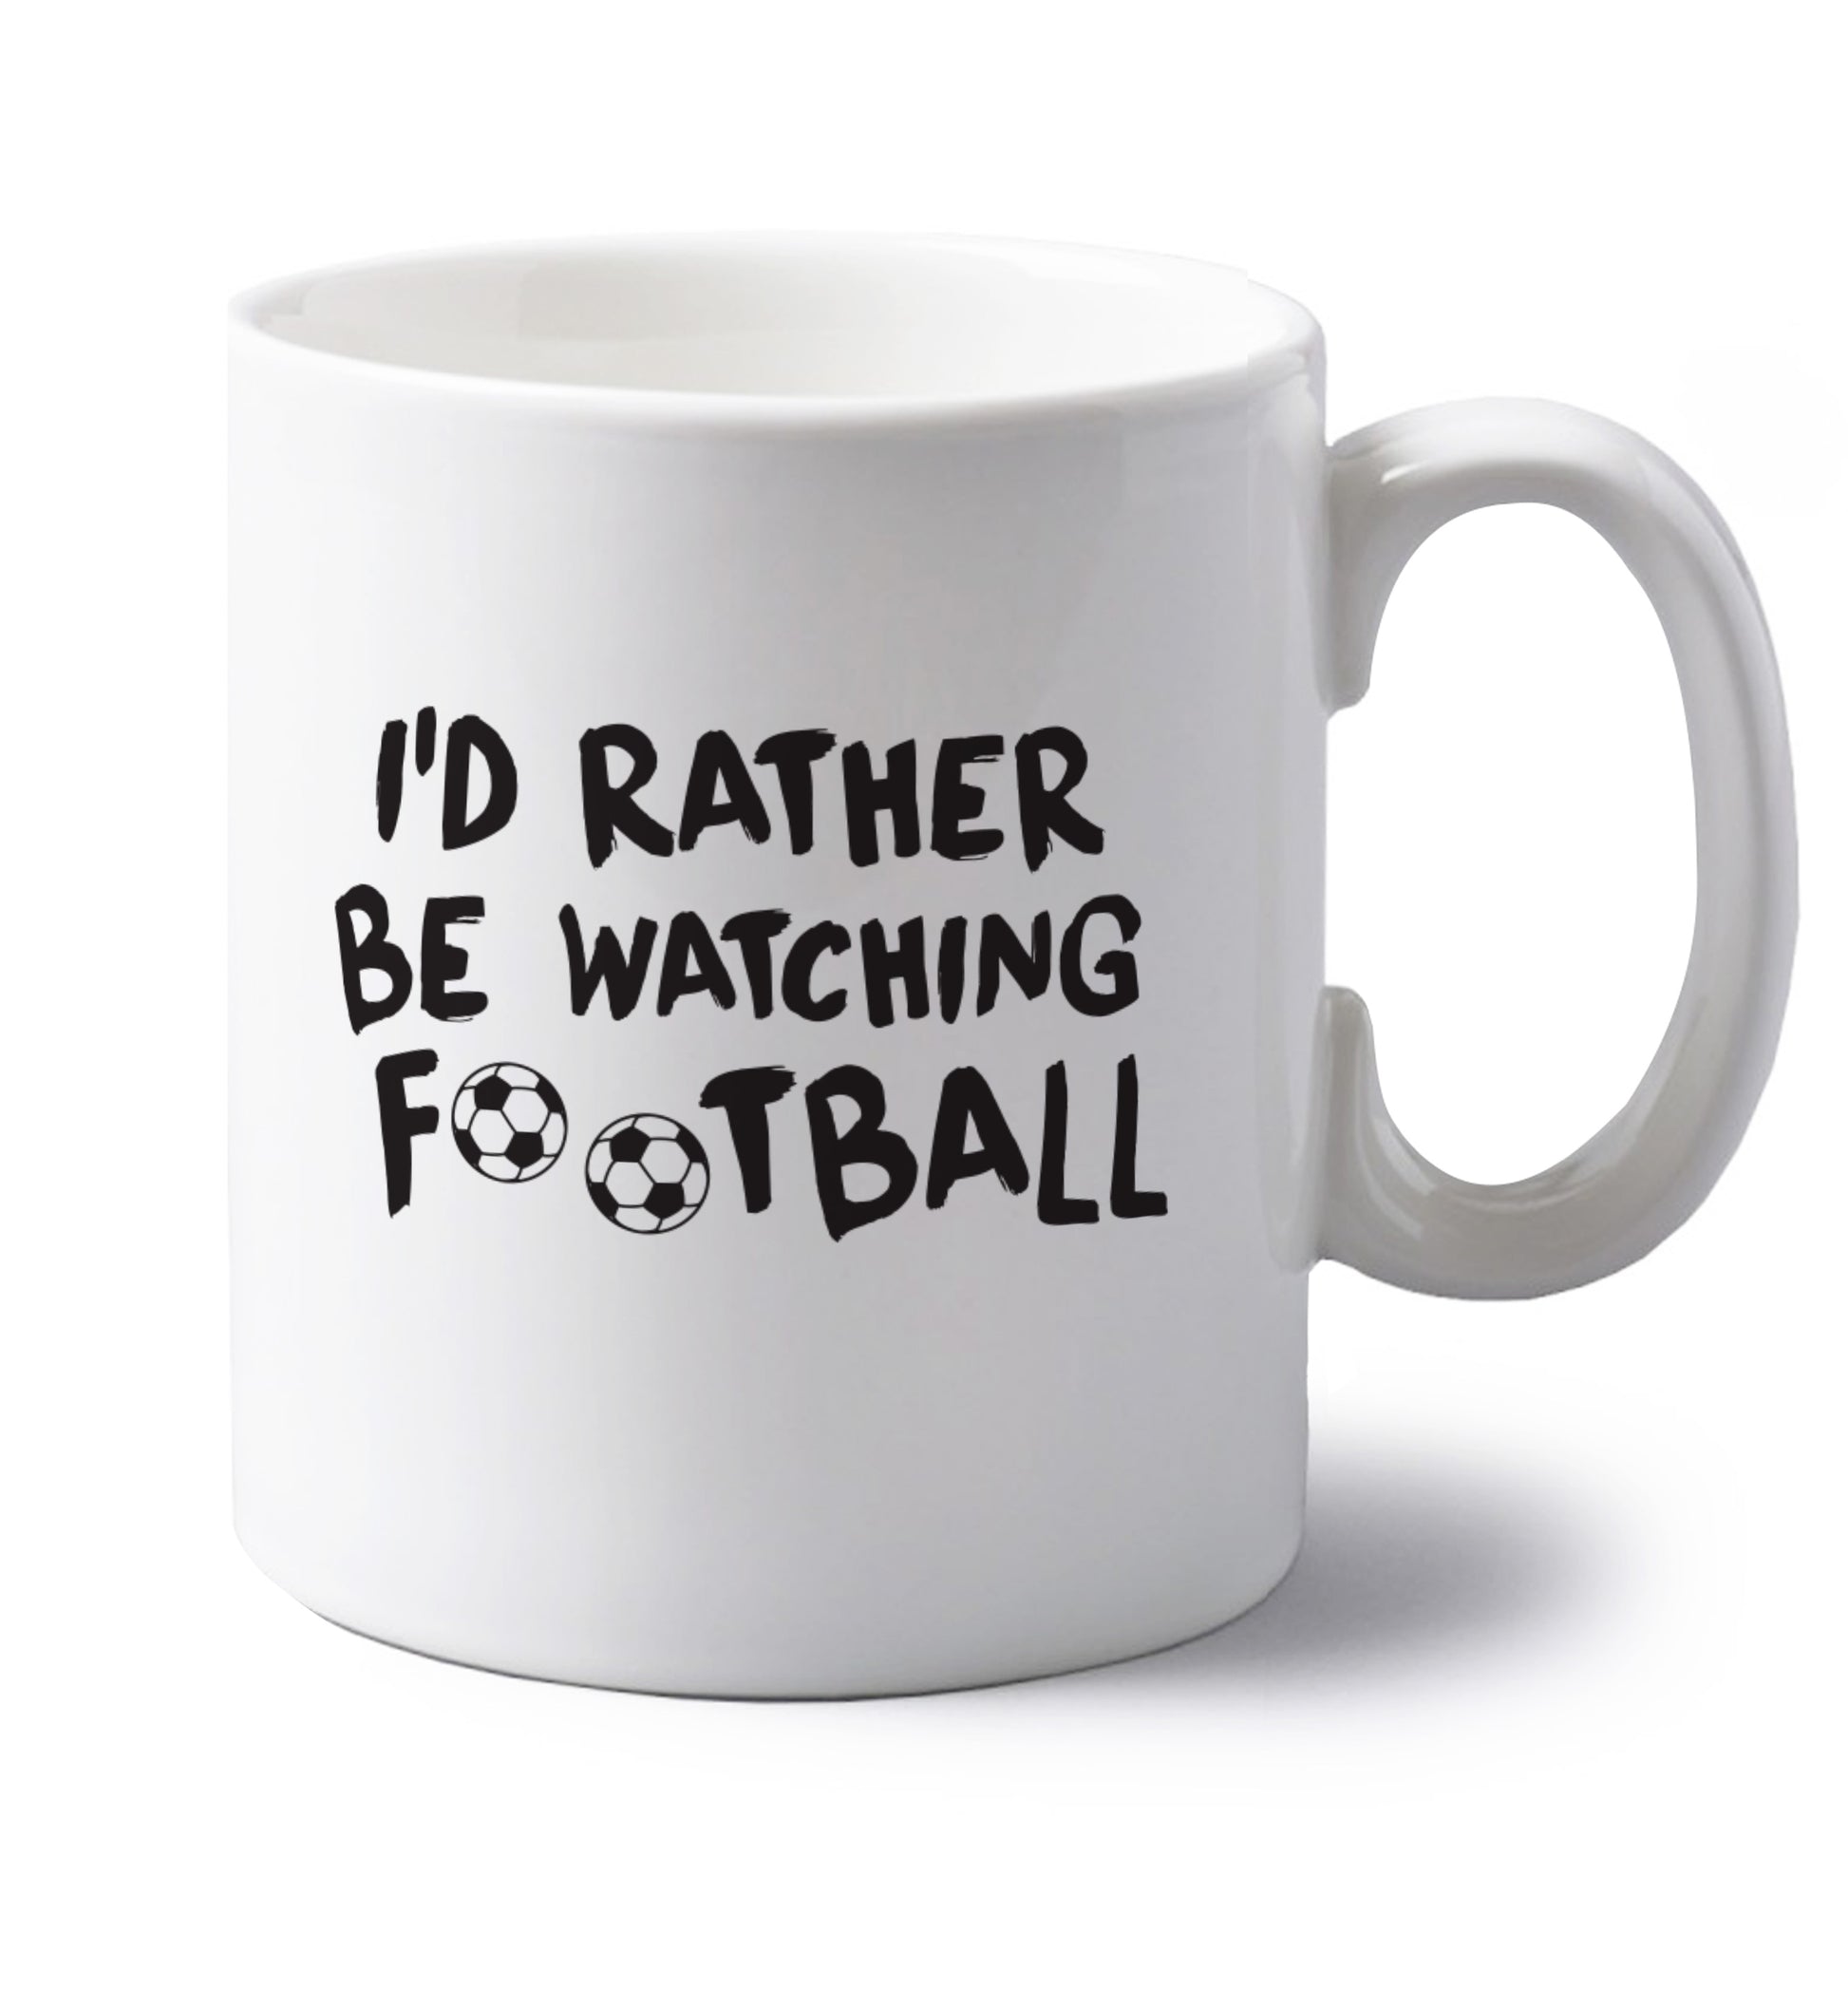 I'd rather be watching football left handed white ceramic mug 